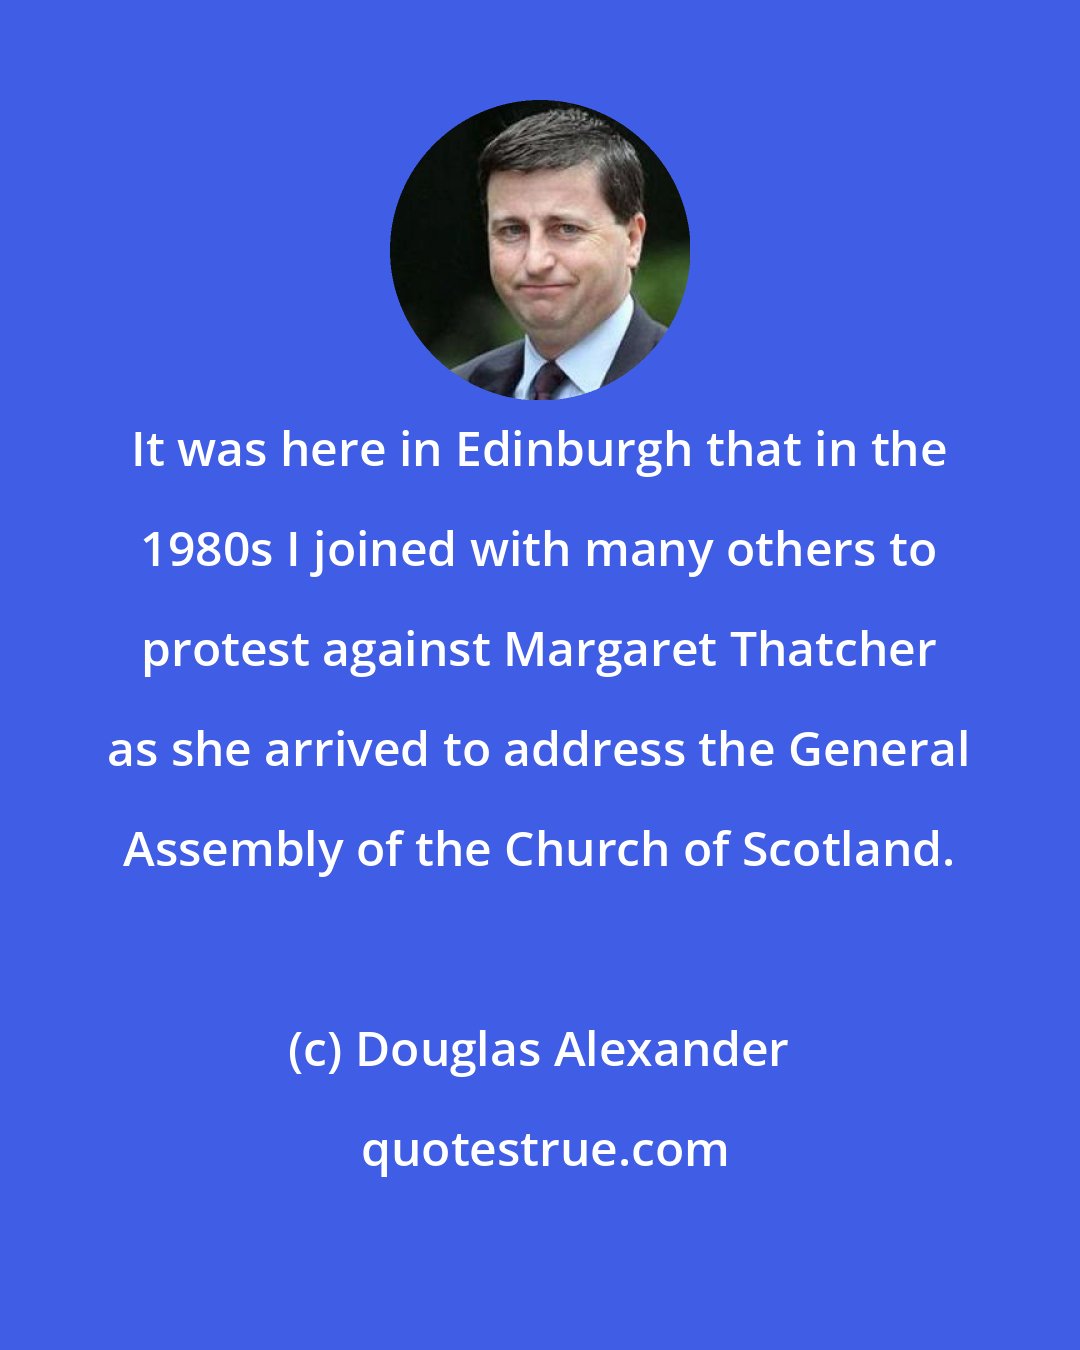 Douglas Alexander: It was here in Edinburgh that in the 1980s I joined with many others to protest against Margaret Thatcher as she arrived to address the General Assembly of the Church of Scotland.